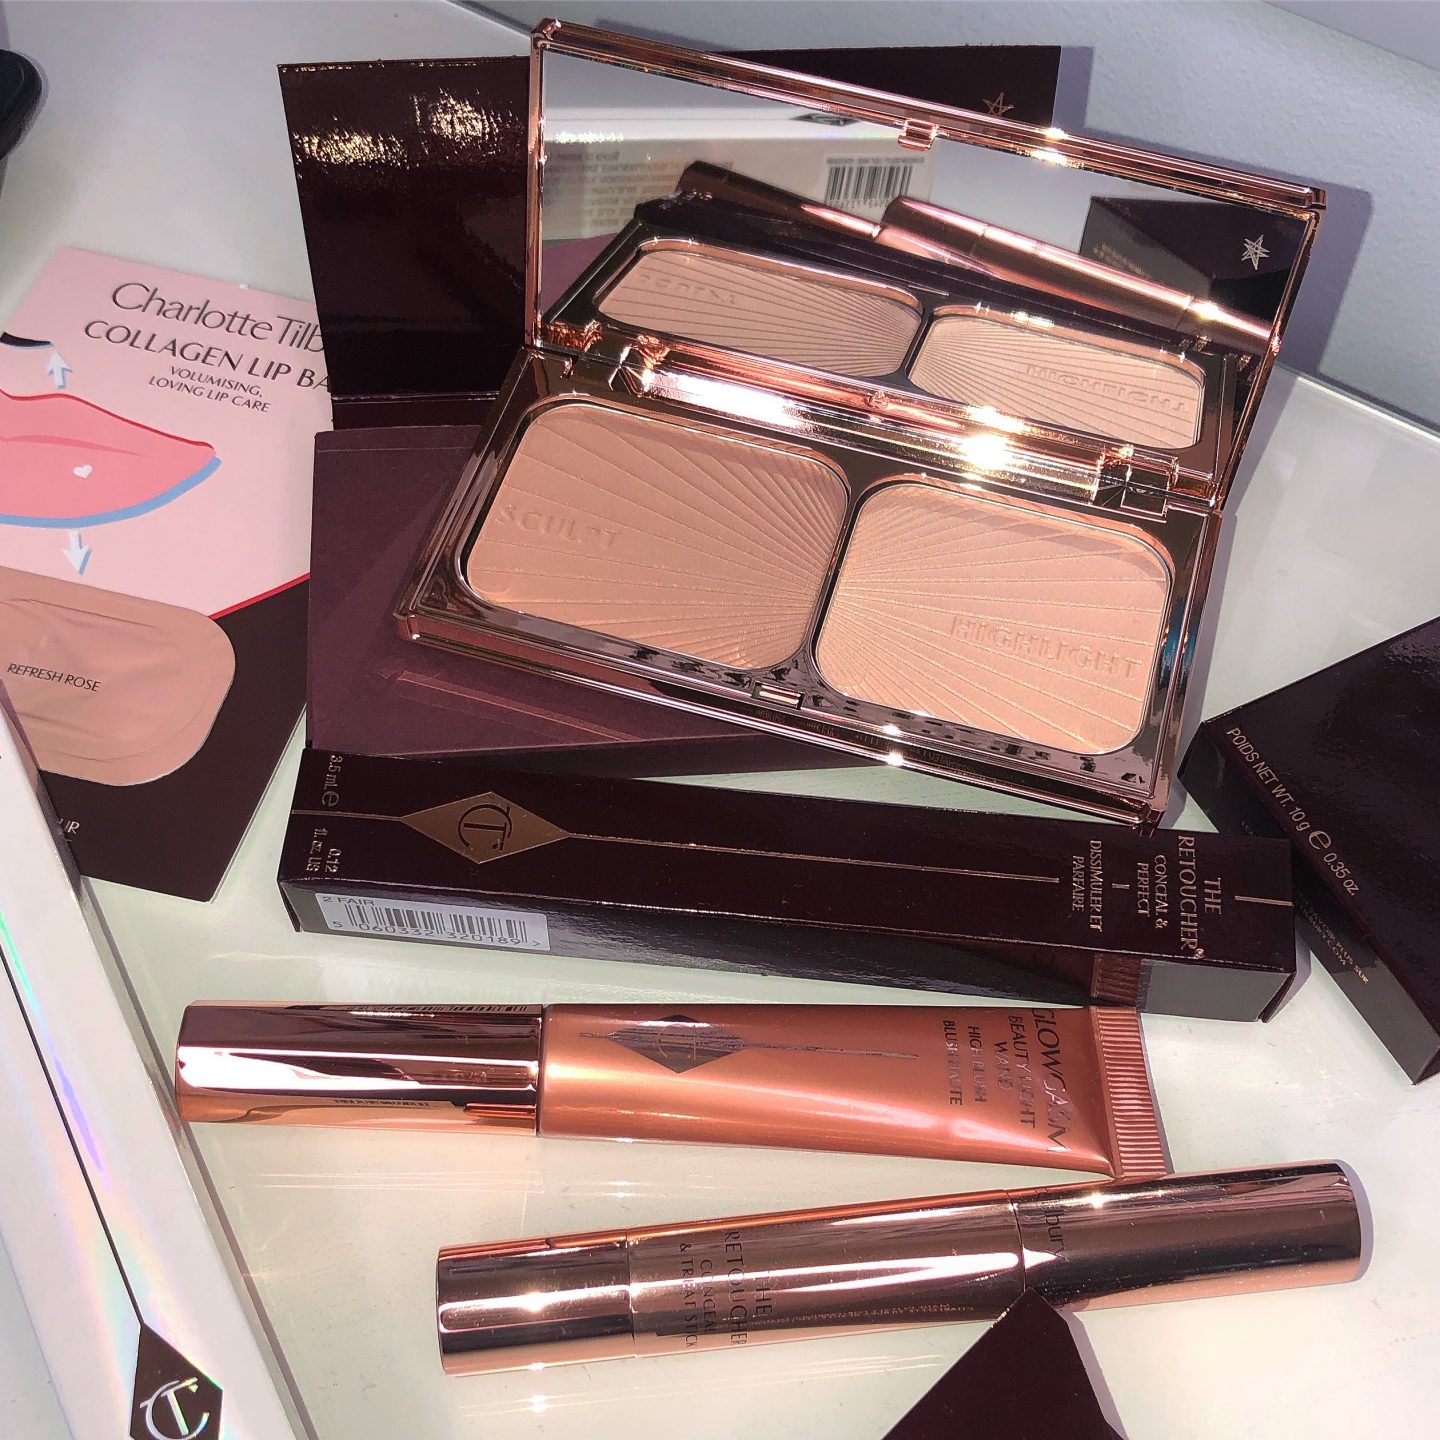 Charlotte tilbury products